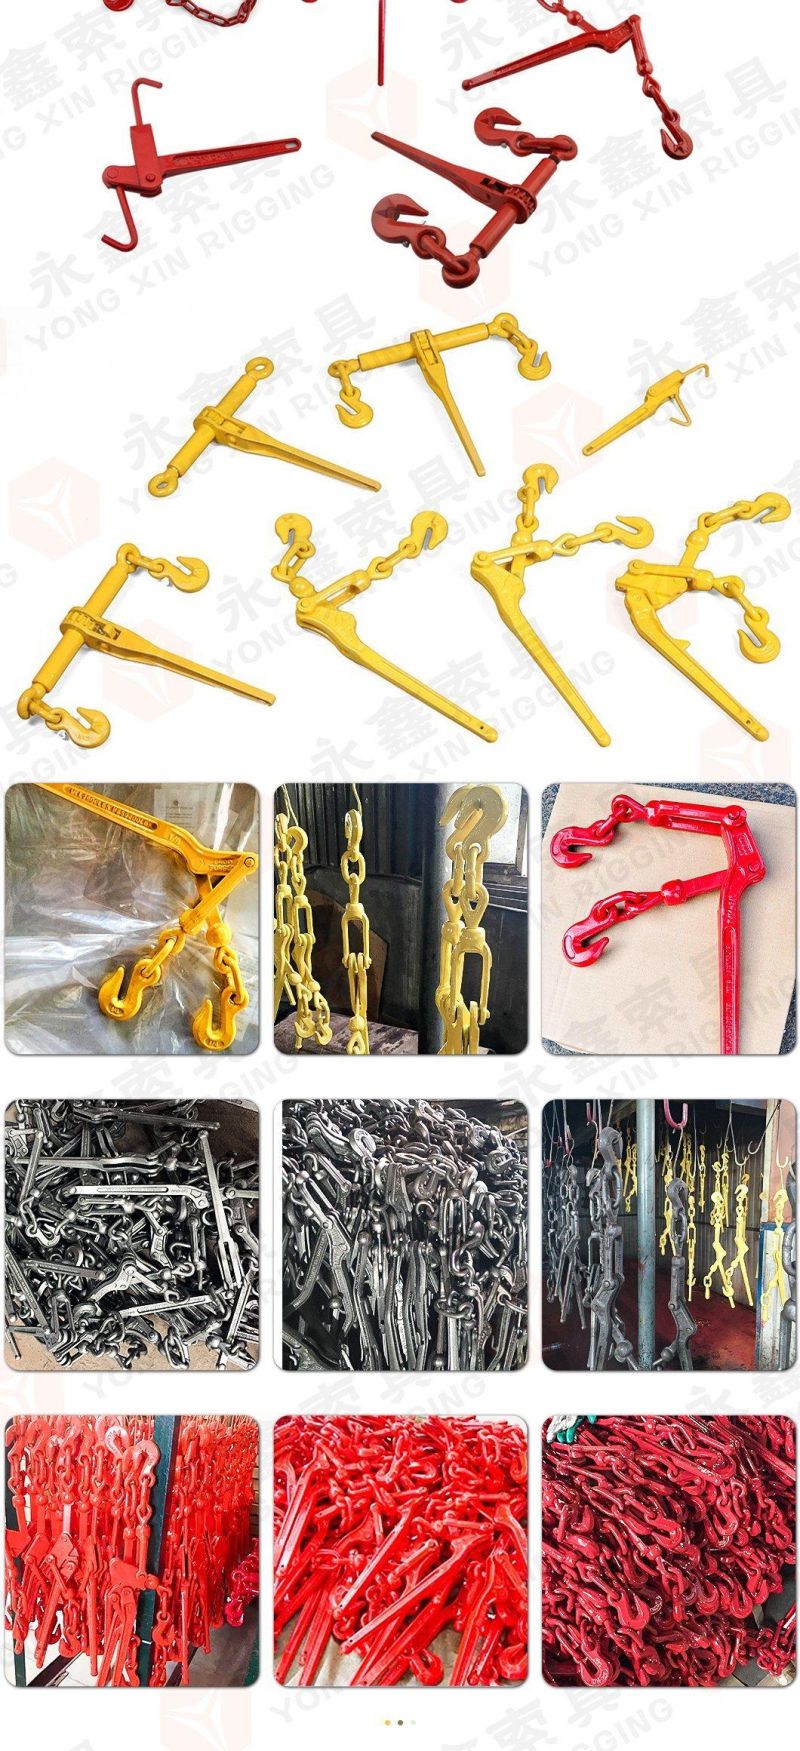 Lever Type Load Binder Lever Type Load Binder Lashing Lever Load Binder G80 G70 Alloy Steel Chain Fastener Spring Lashing Lever Tension Lever Load Binder